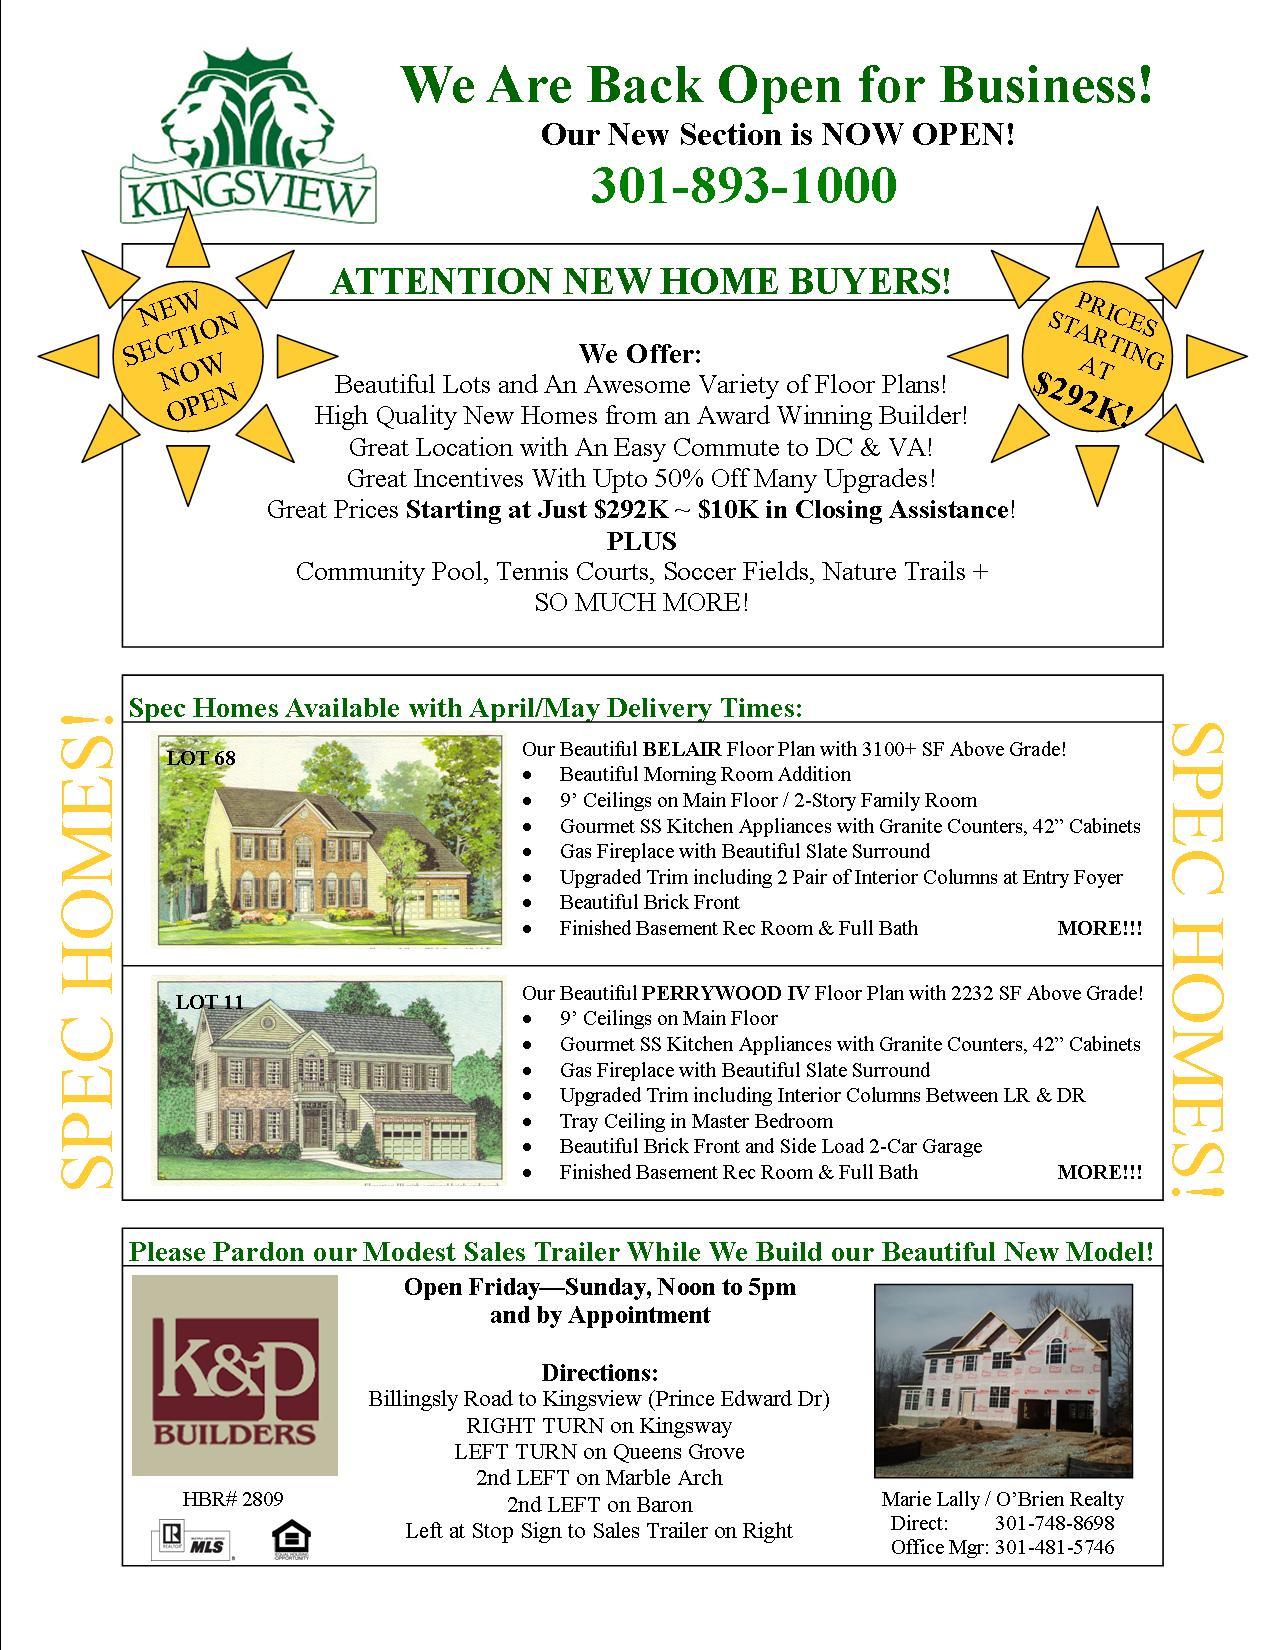 Kingsview New Homes for Sale in Charles County MD - Southern Maryland New Homes by K&P Builders and Marie Lally of O'Brien Realty